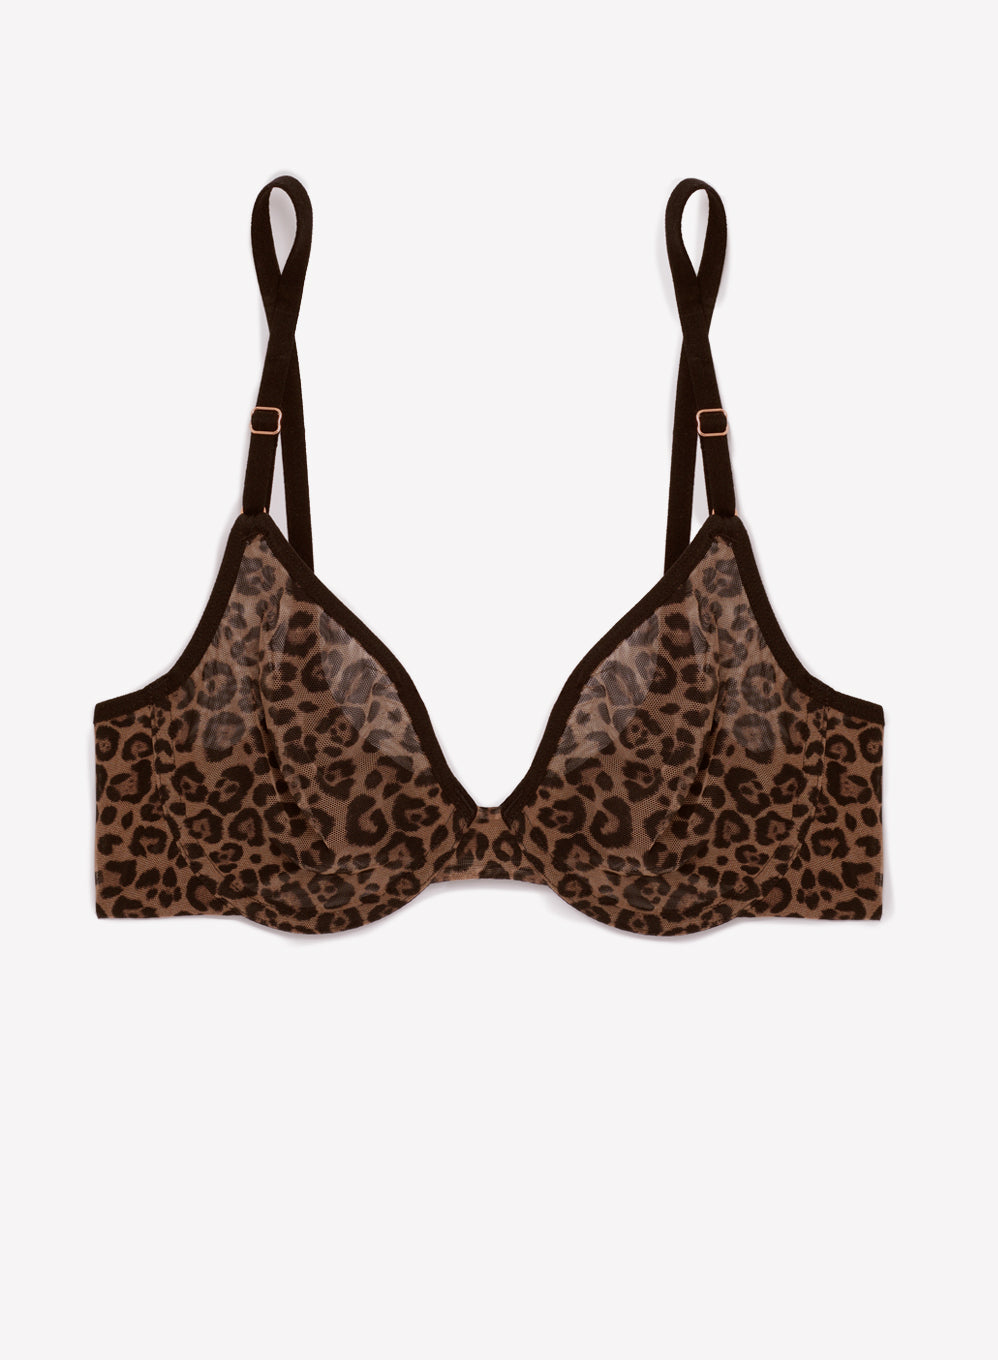 Delimira 36D Convertible Leopard Animal Print Bra Charcoal Panthera Uncia  for sale online